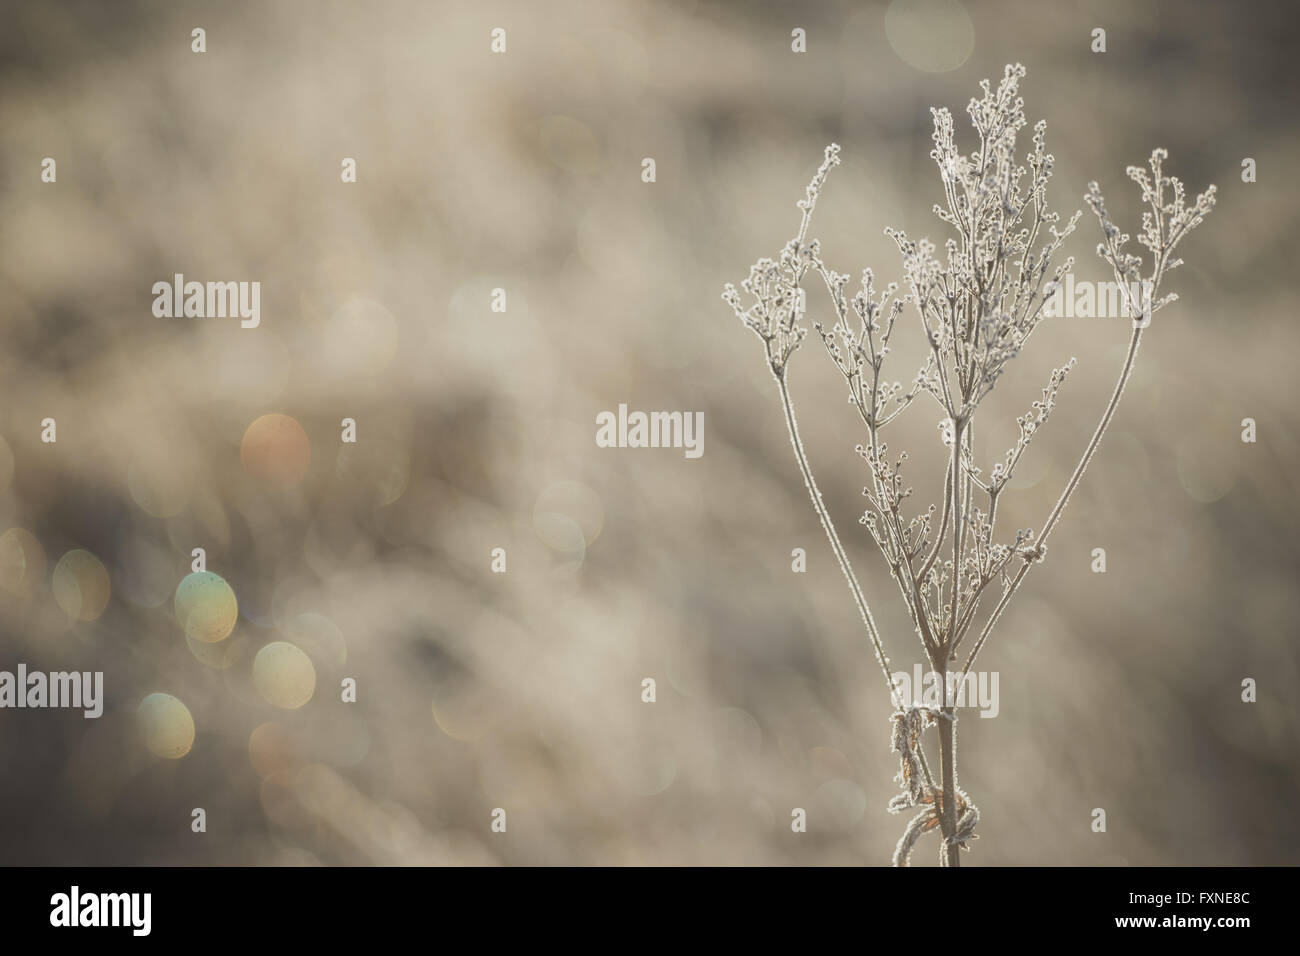 Dry plants covered by ice crystals, open aperture with soft bokeh Stock Photo